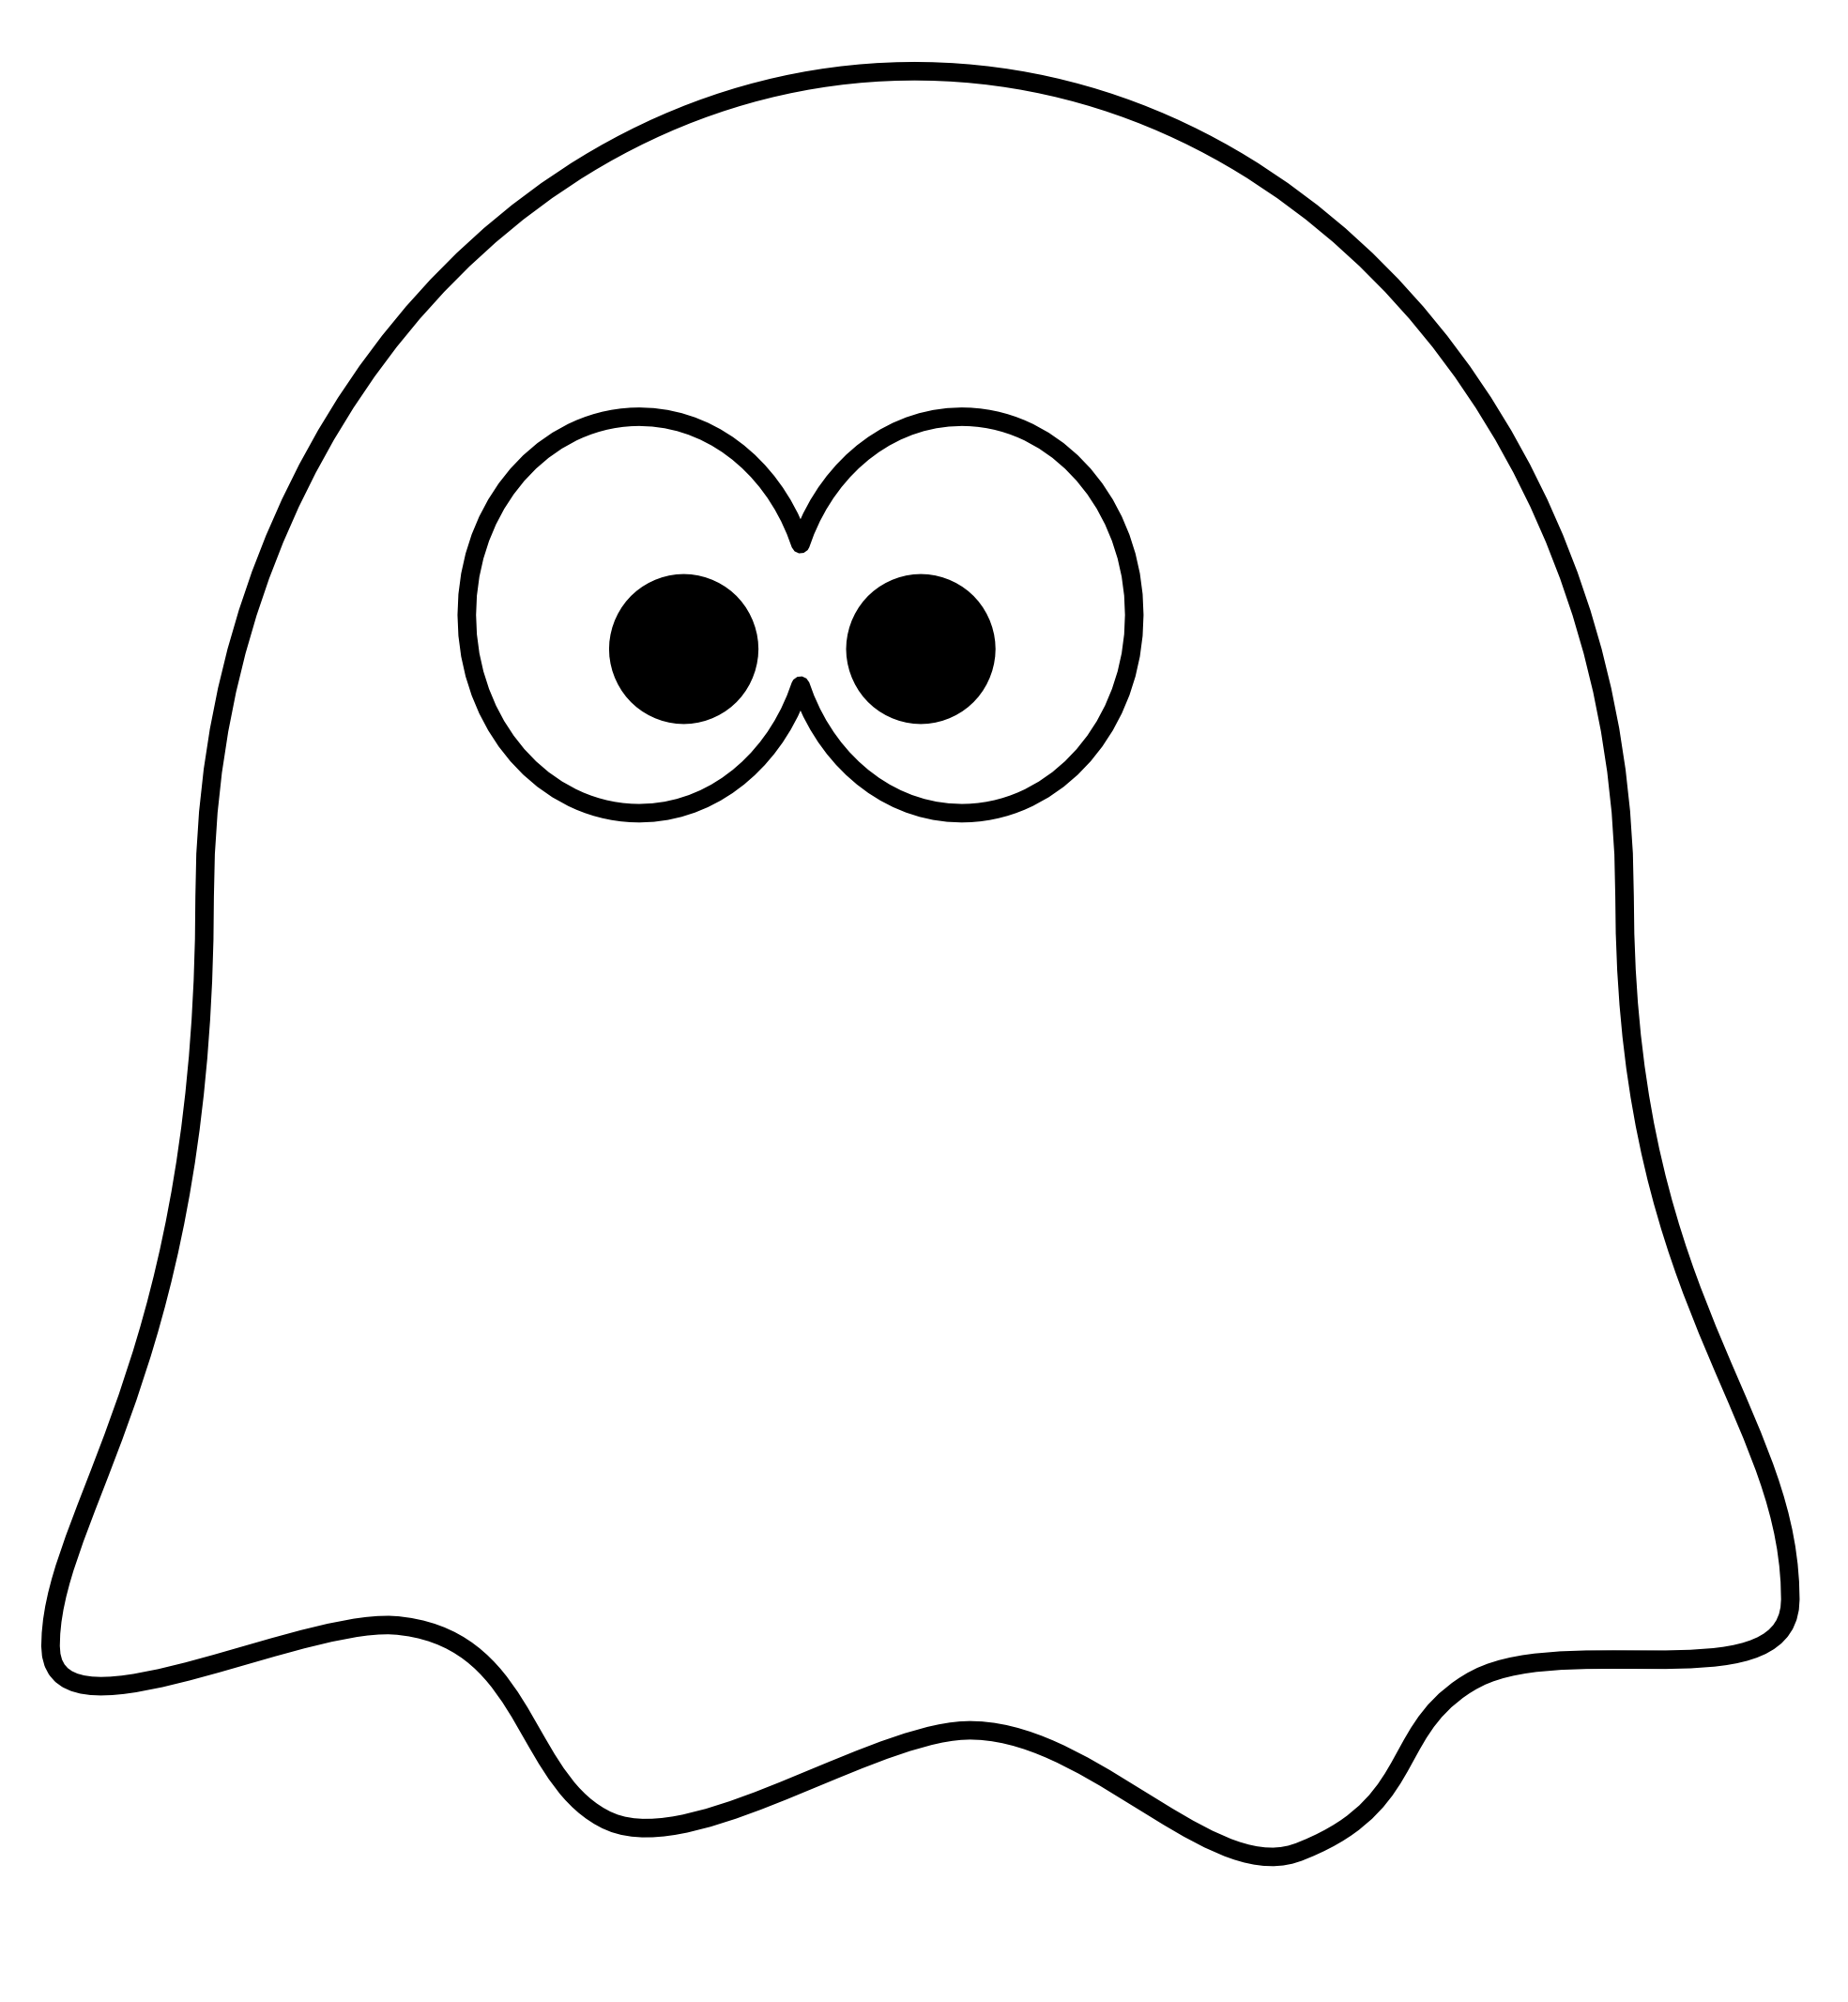 Picture Of A Cartoon Ghost - Clipart library